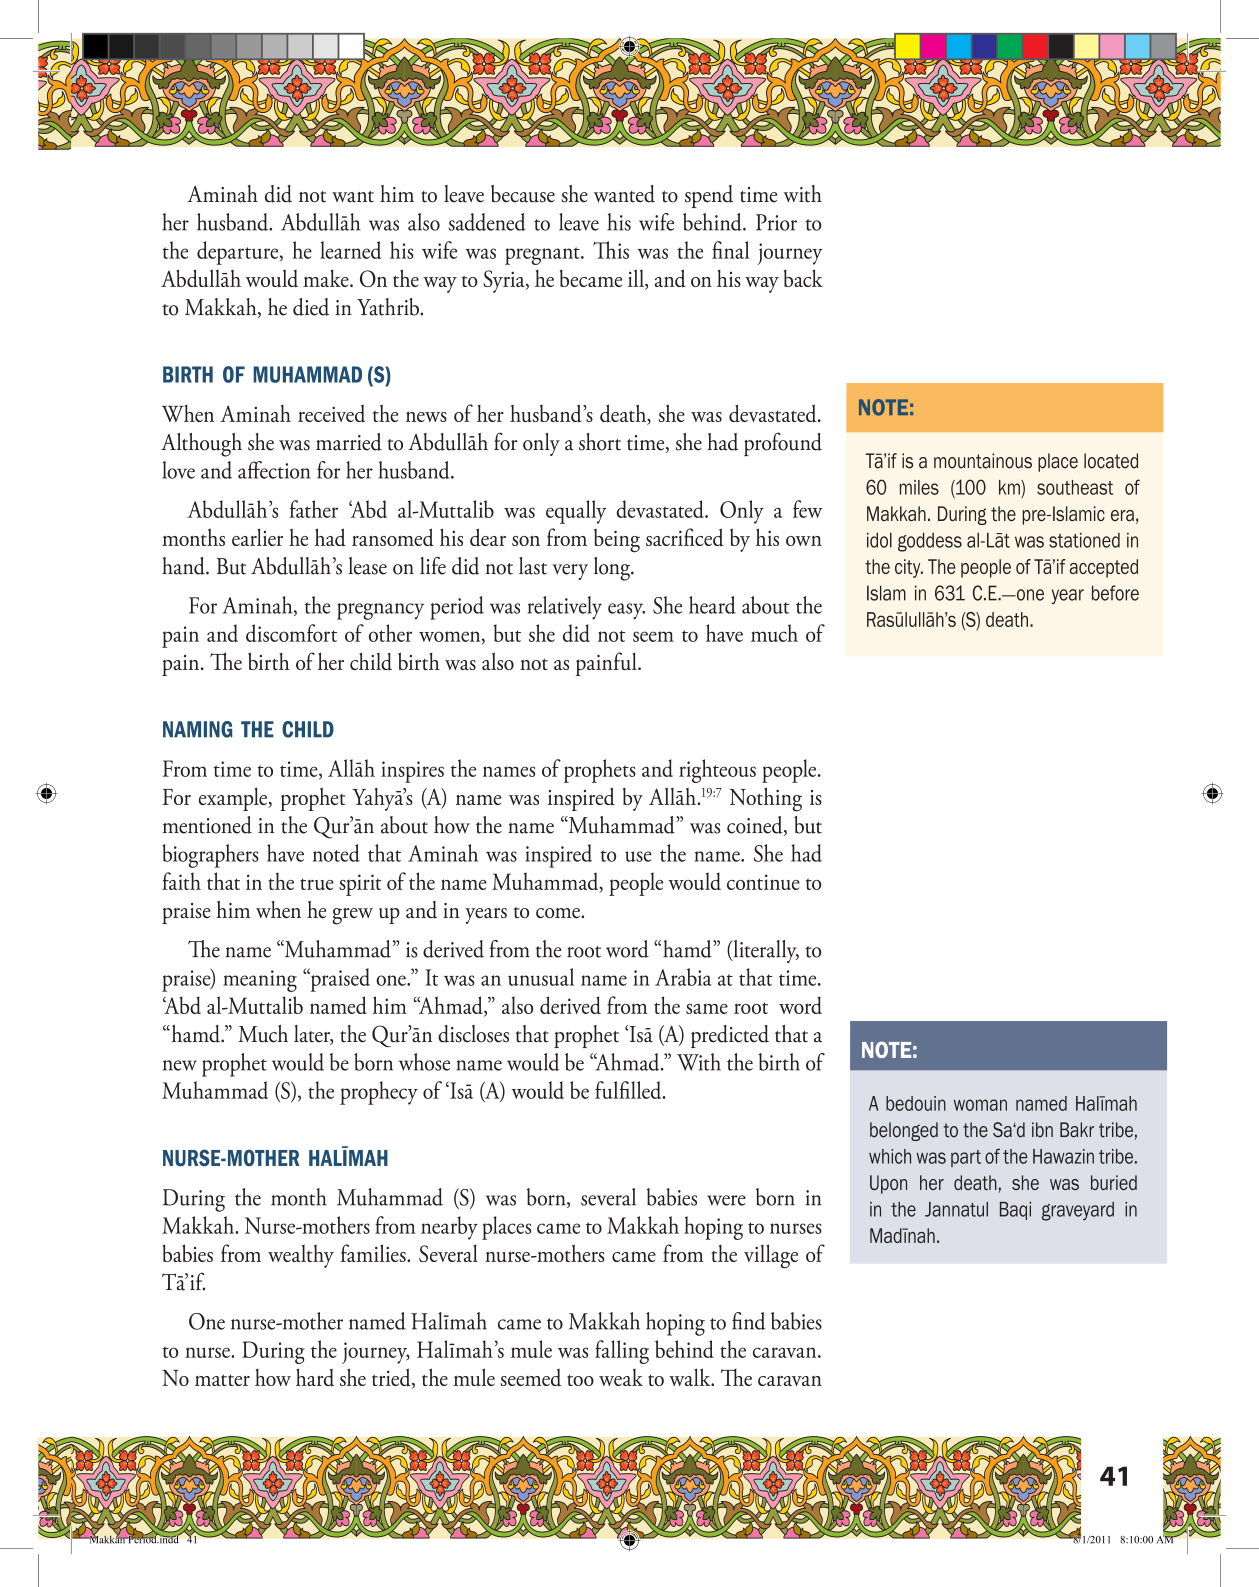 Life of Rasulullah - Makkah Period - Seerah - Weekend Learning Publishers - Sample Lesson - Page 41